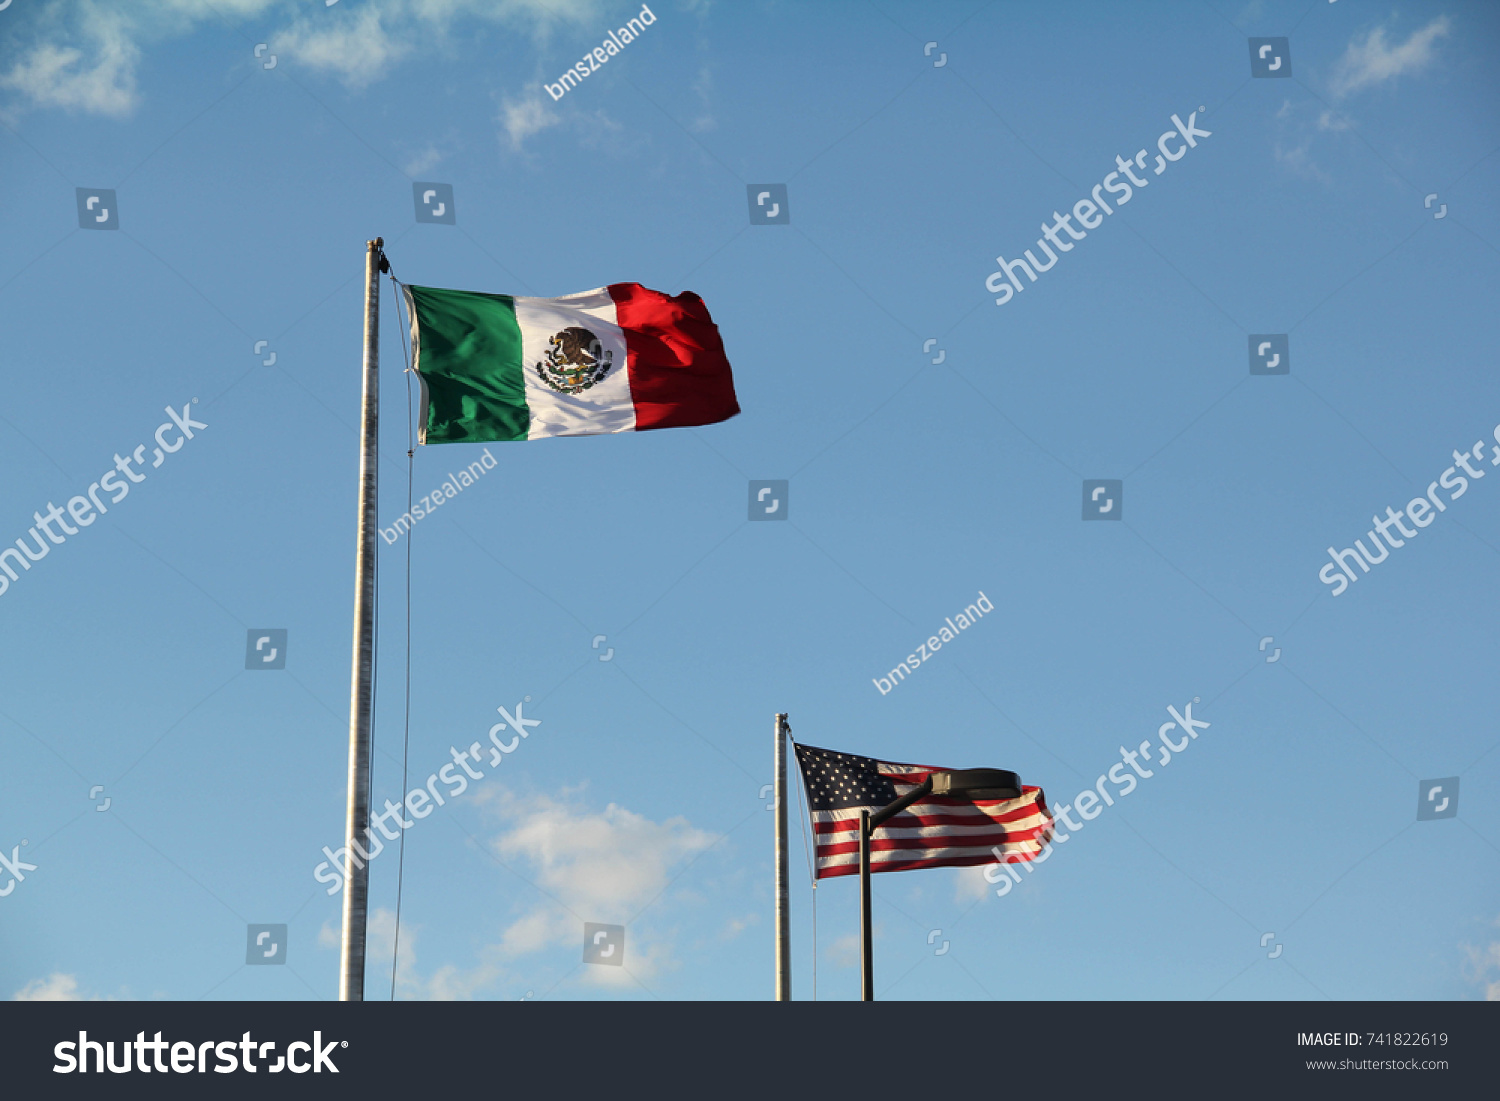 A Mexican flag and a flag of the United States of America, marking the border between Ciudad Juarez, Mexico, and El Paso, Texas #741822619